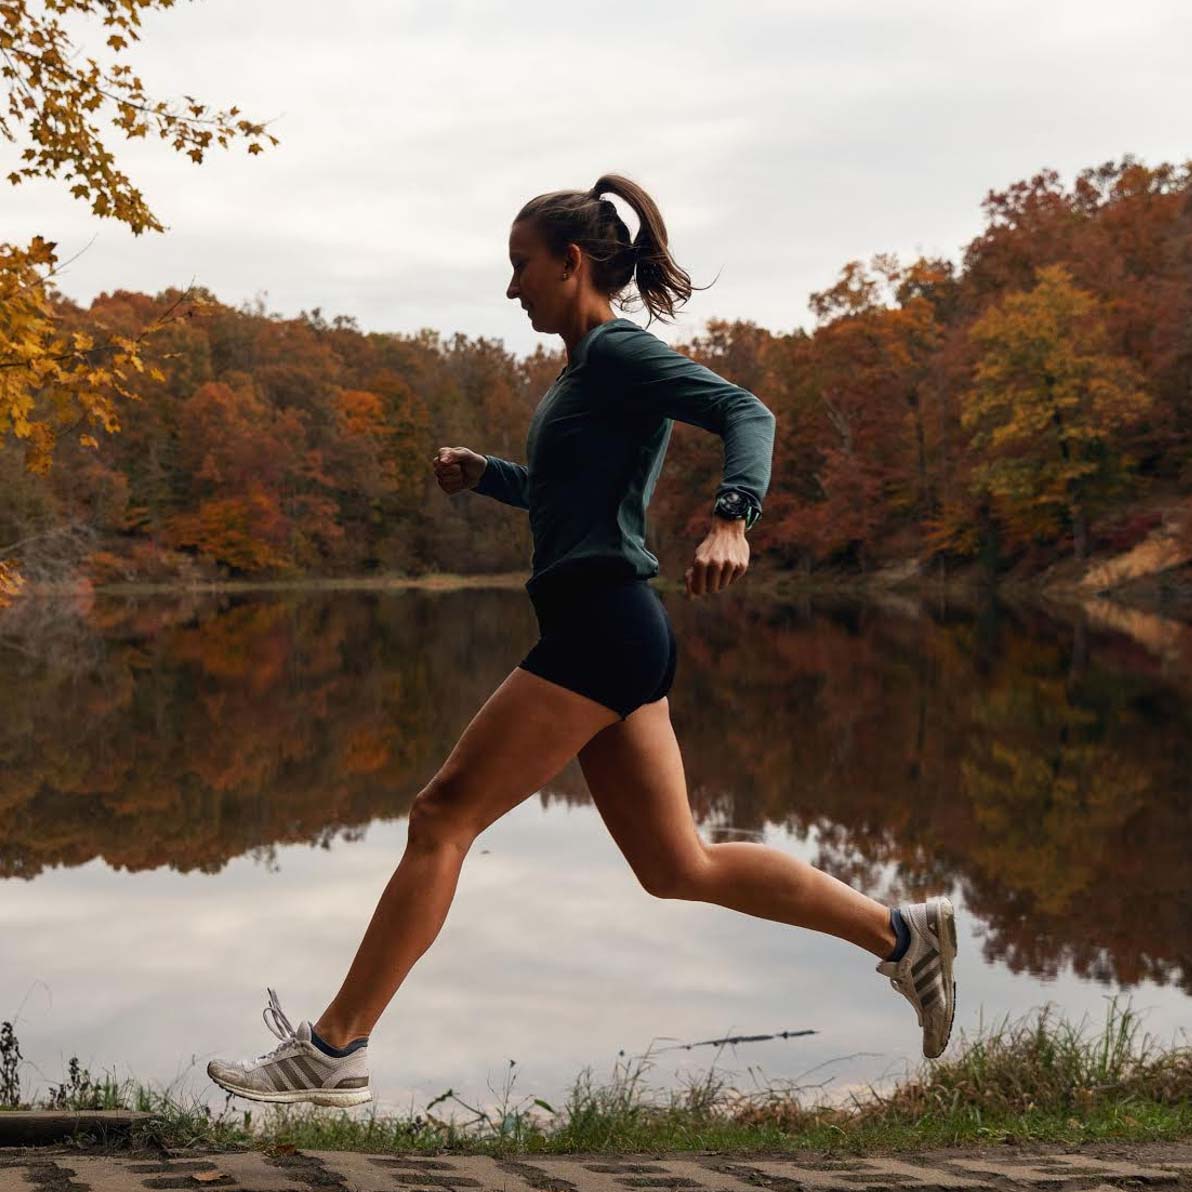 Olivia Ballew runs past a lake as she trains for a marathon. Beautiful fall foliage in the background.